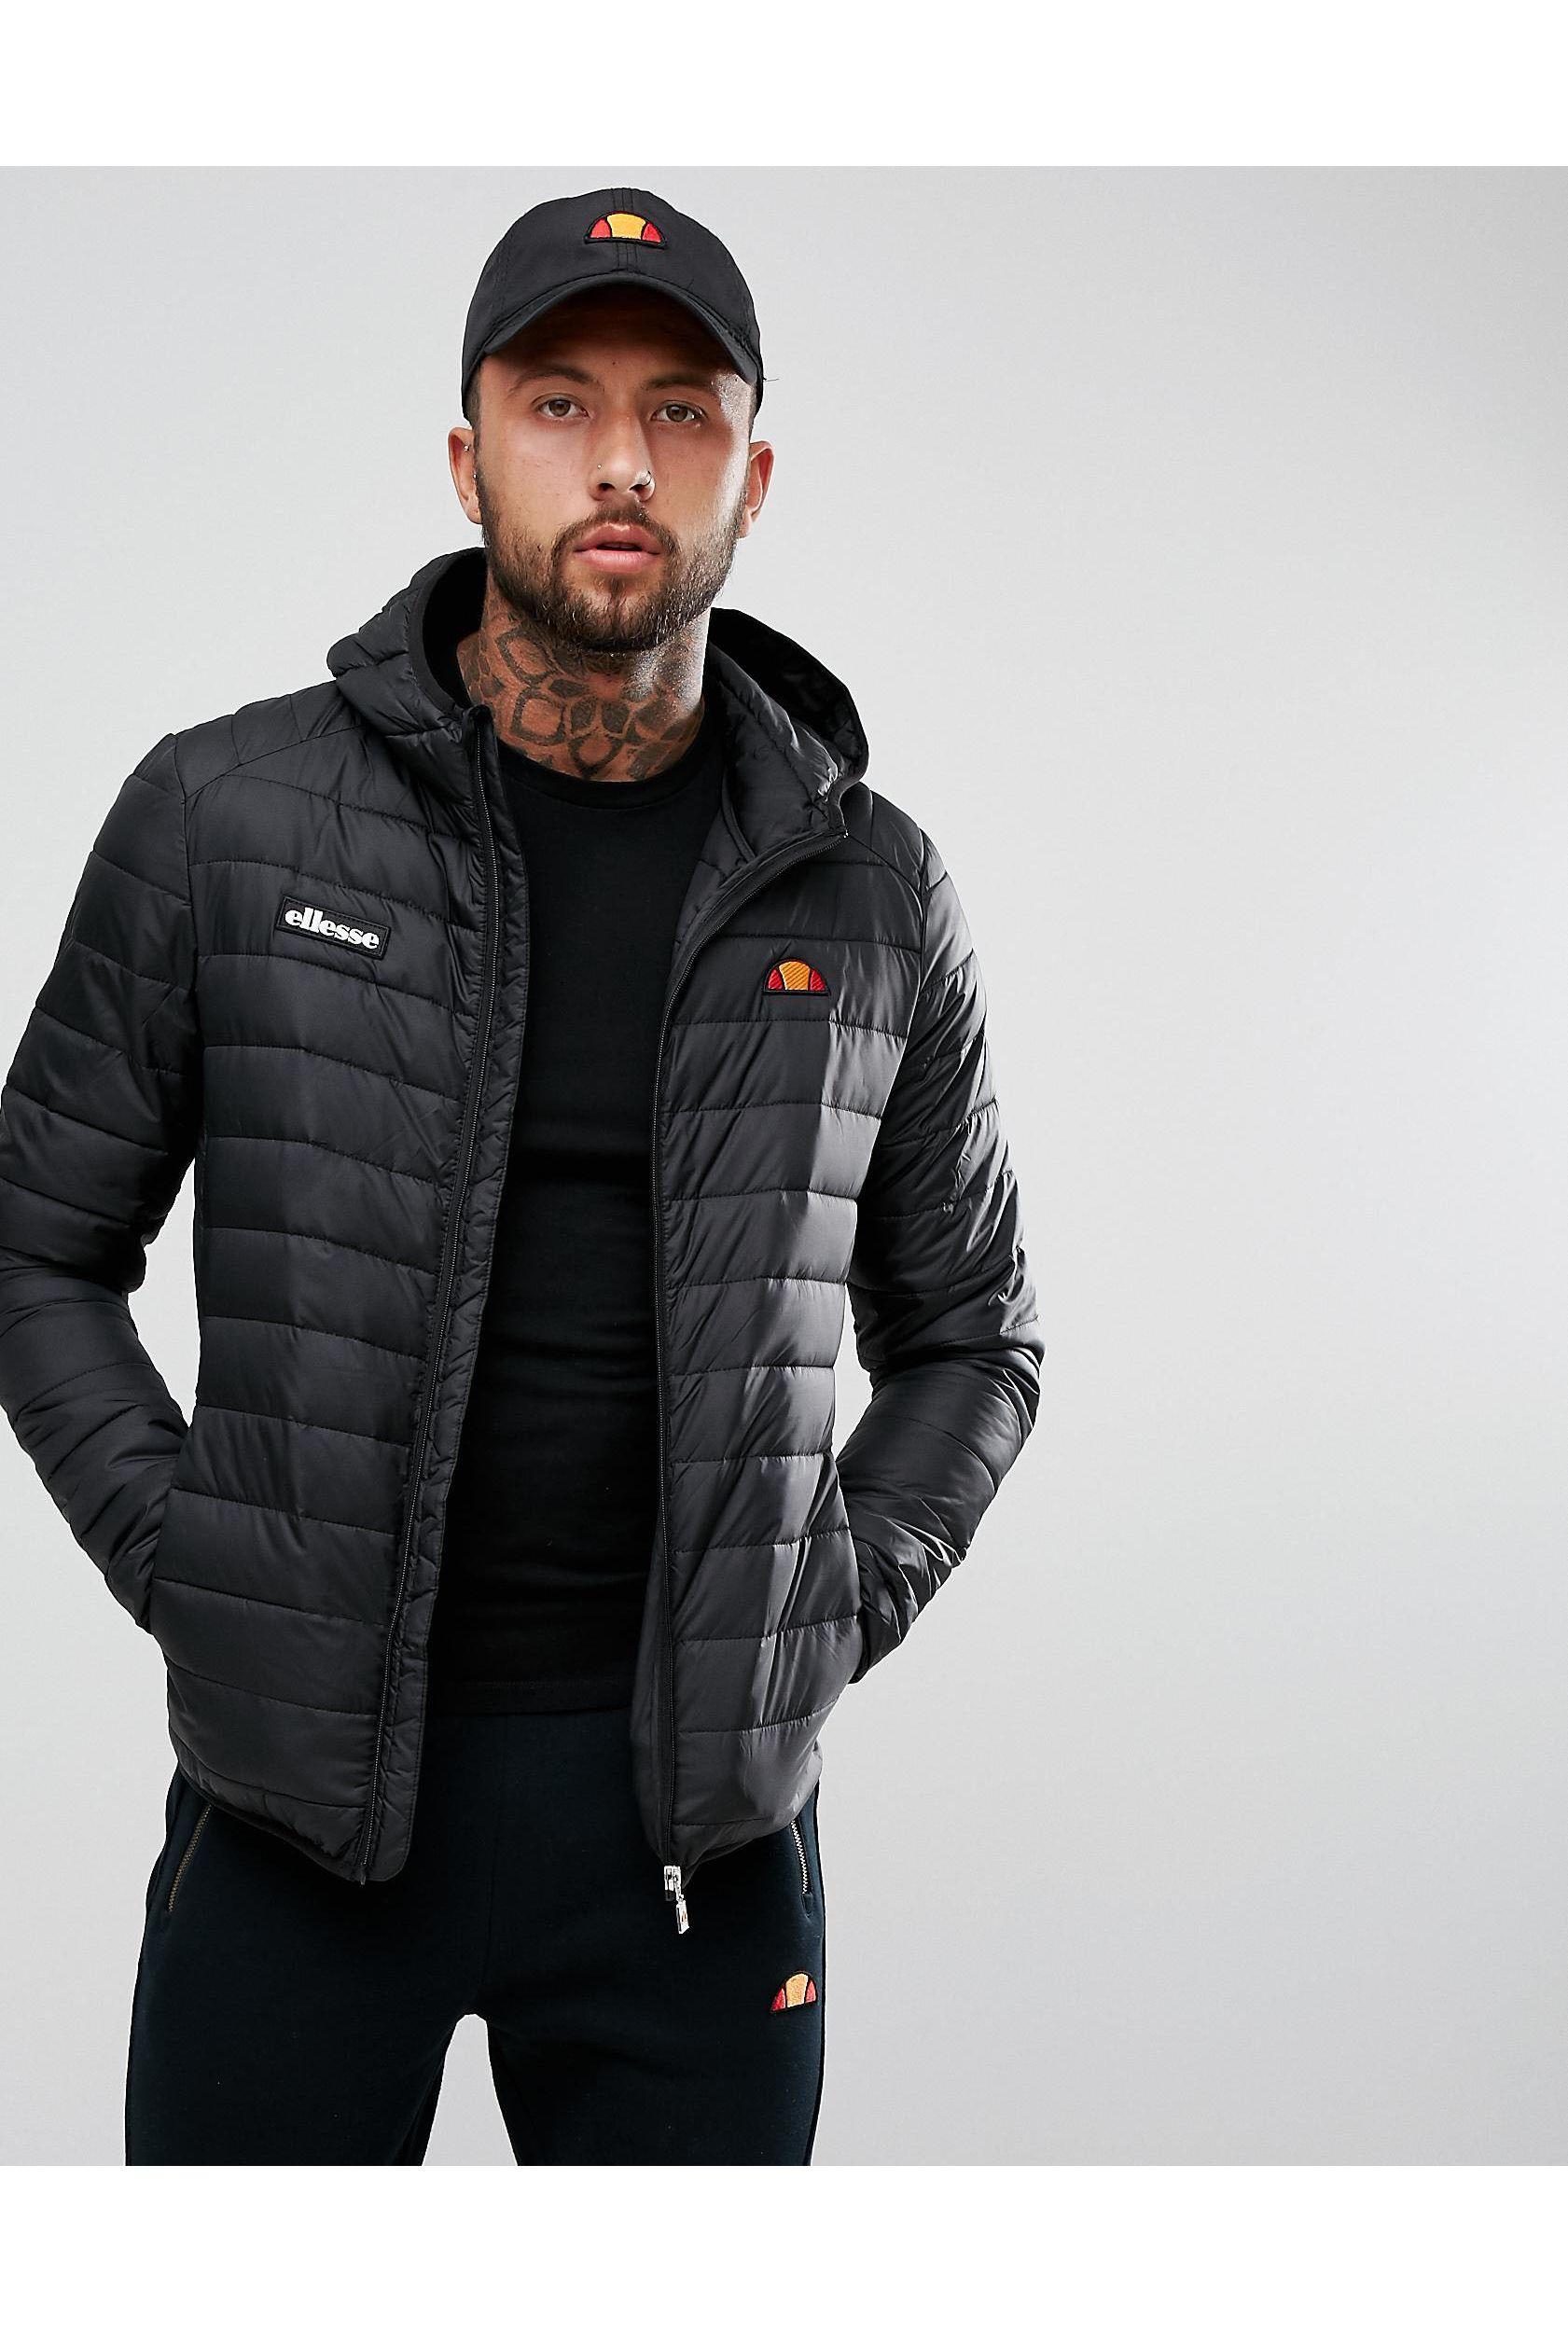 Ellesse Synthetic Lombardy Padded Jacket in Black for Men - Lyst